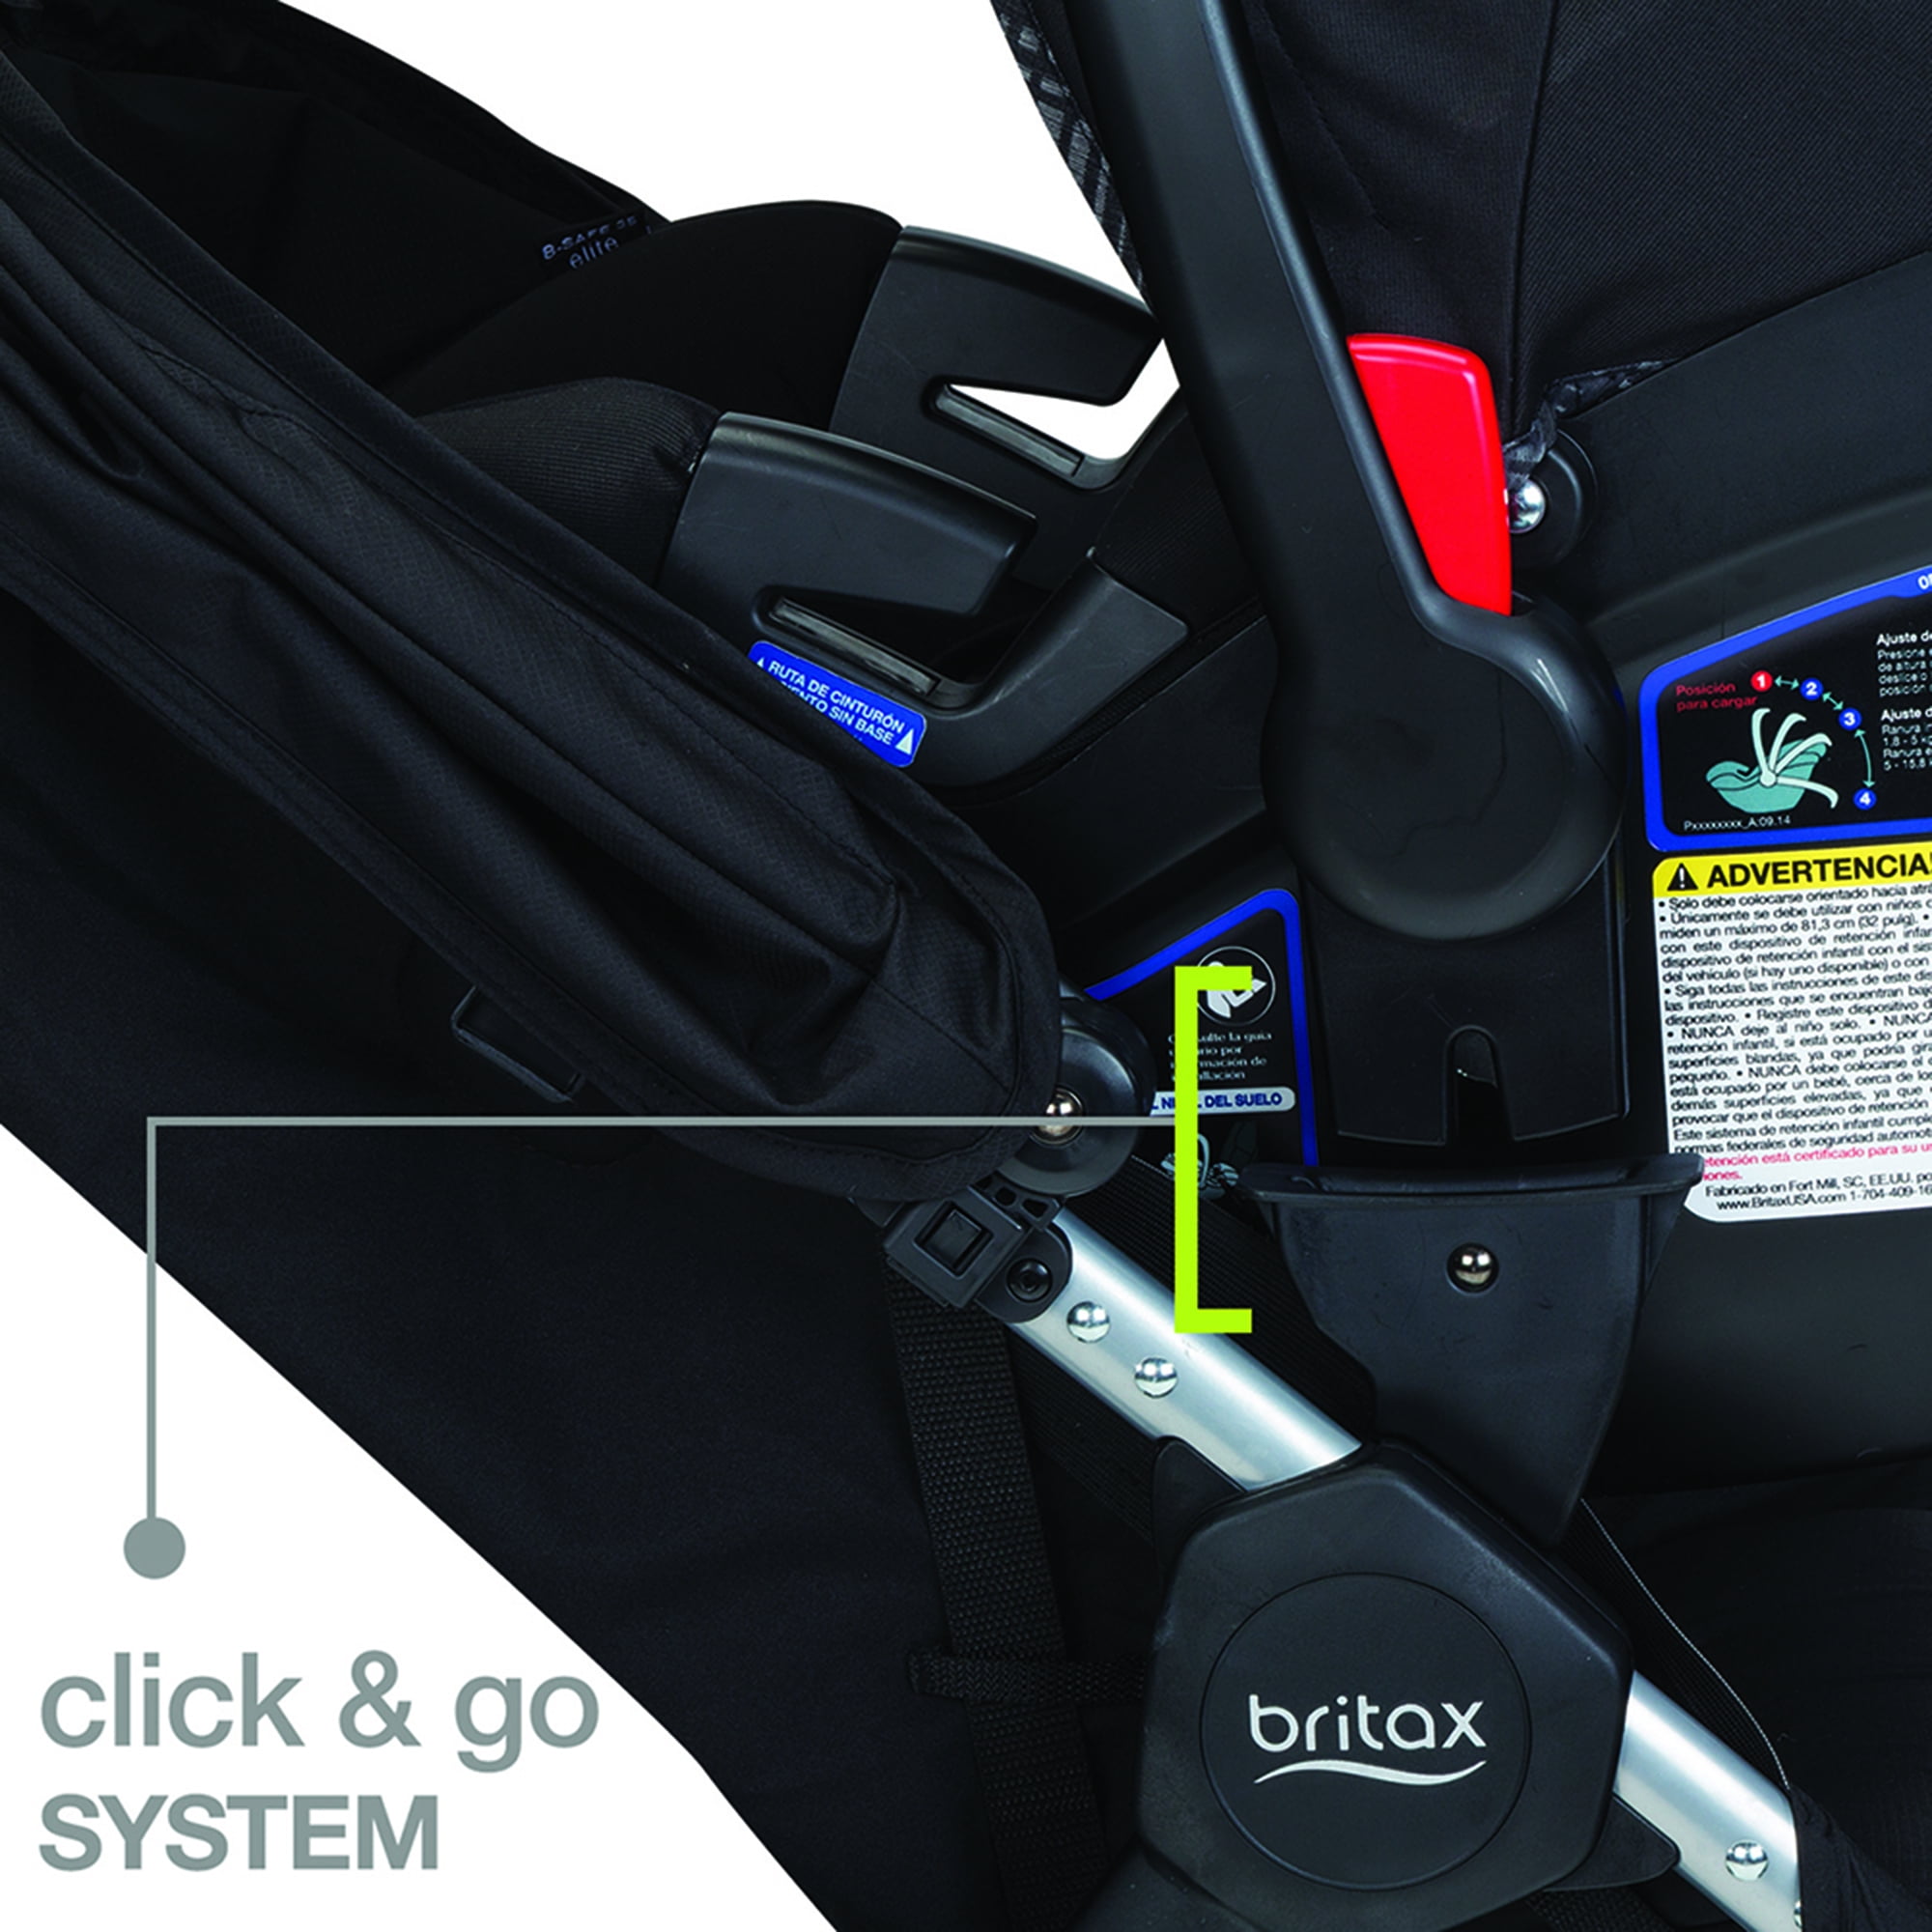 Baby Car Seat BABY-SAFE ISOFIX BASE at Rs 21999